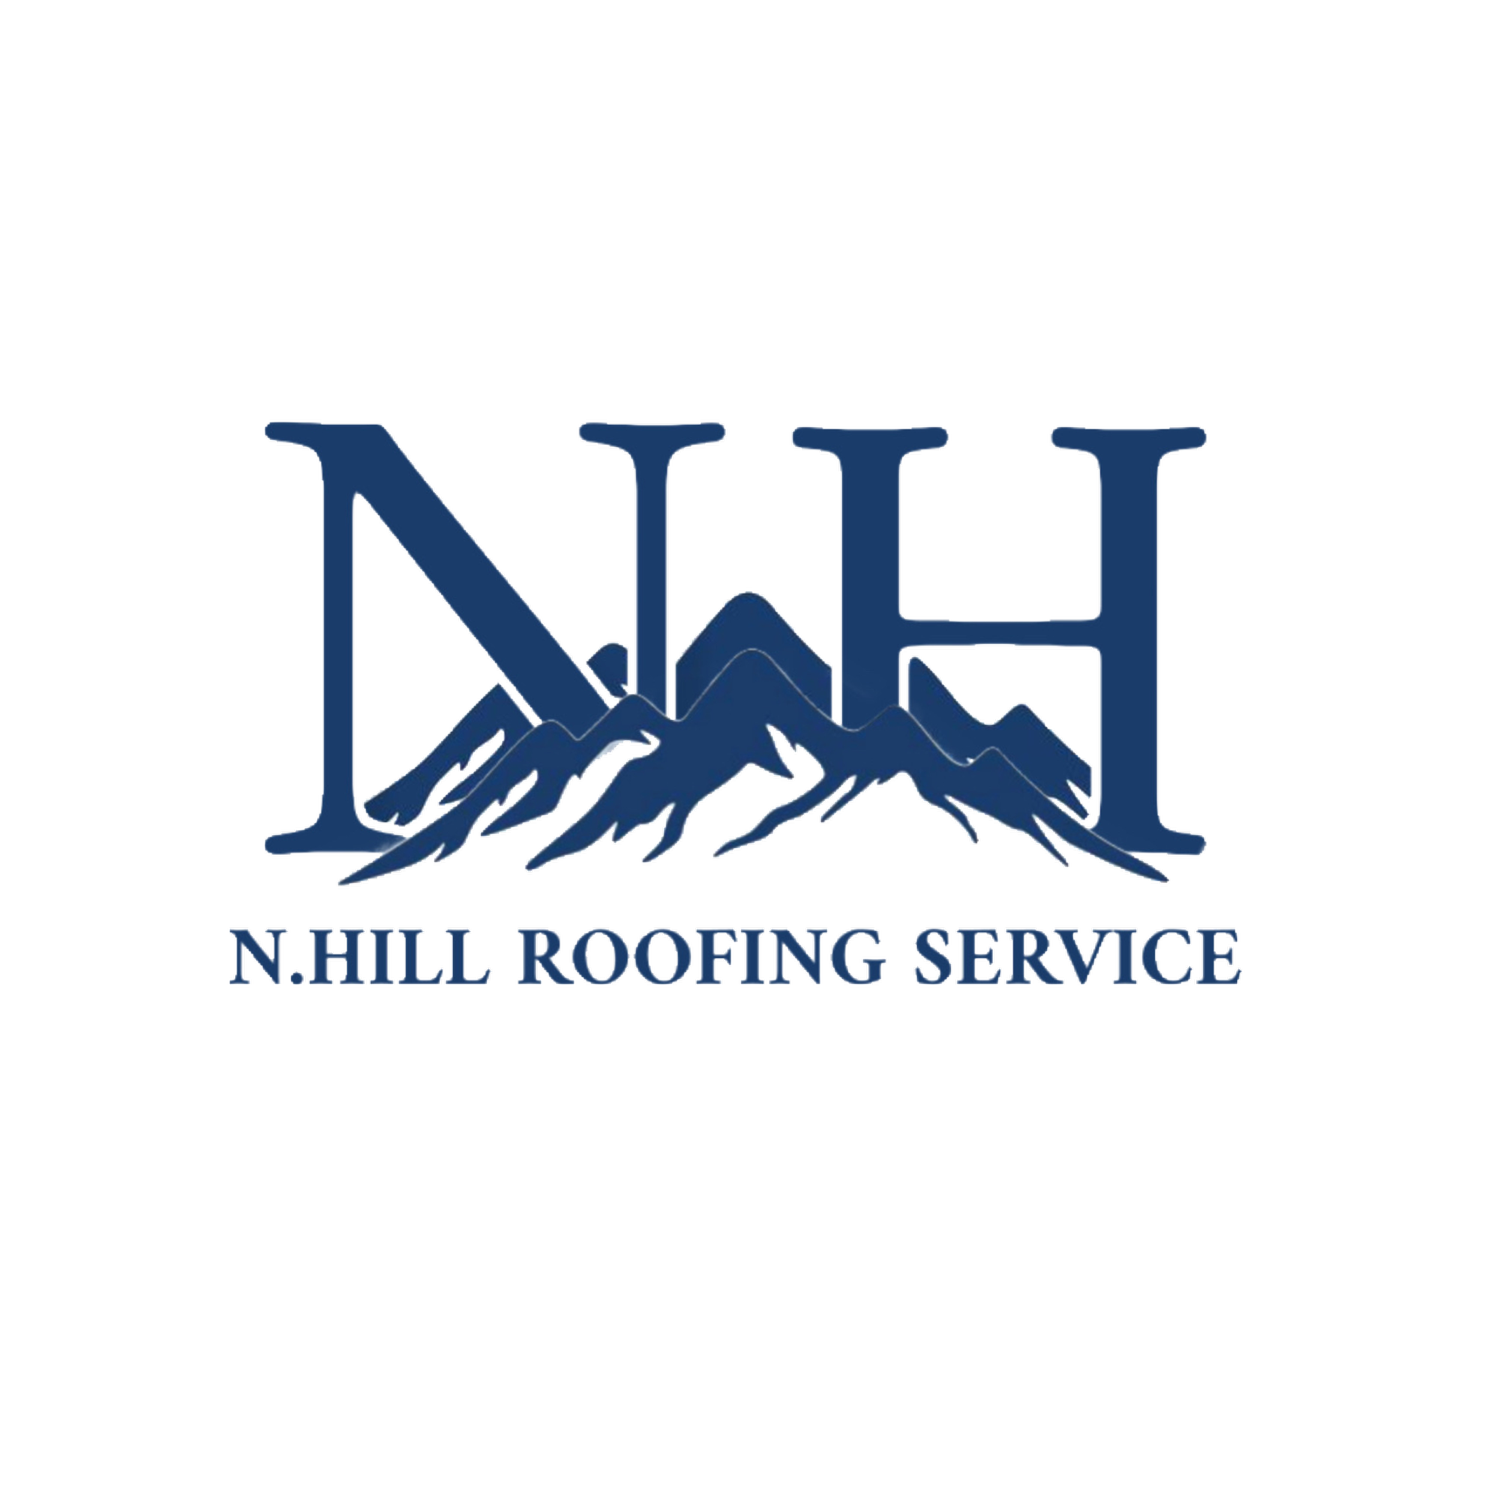 N Hill roofing service 